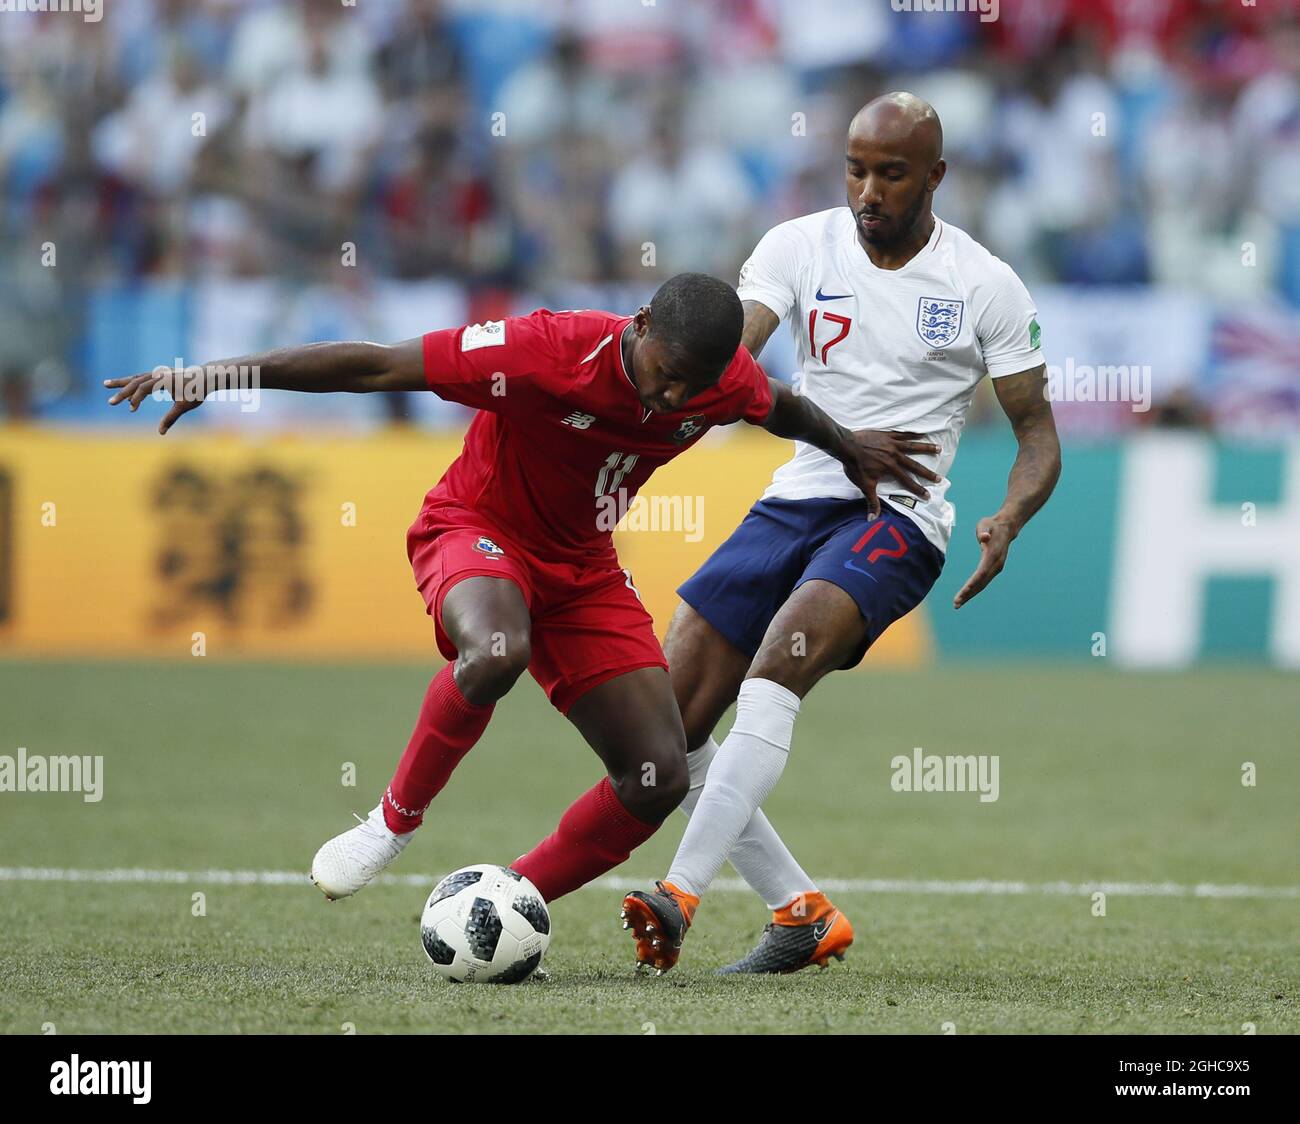 Armando Cooper of Panama tackled by Fabian Delph of England during the FIFA World Cup 2018 Group G match at the Nizhny Novgorod Stadium, Nizhny Novgorod. Picture date 24th June 2018. Picture credit should read: David Klein/Sportimage via PA Images Stock Photo